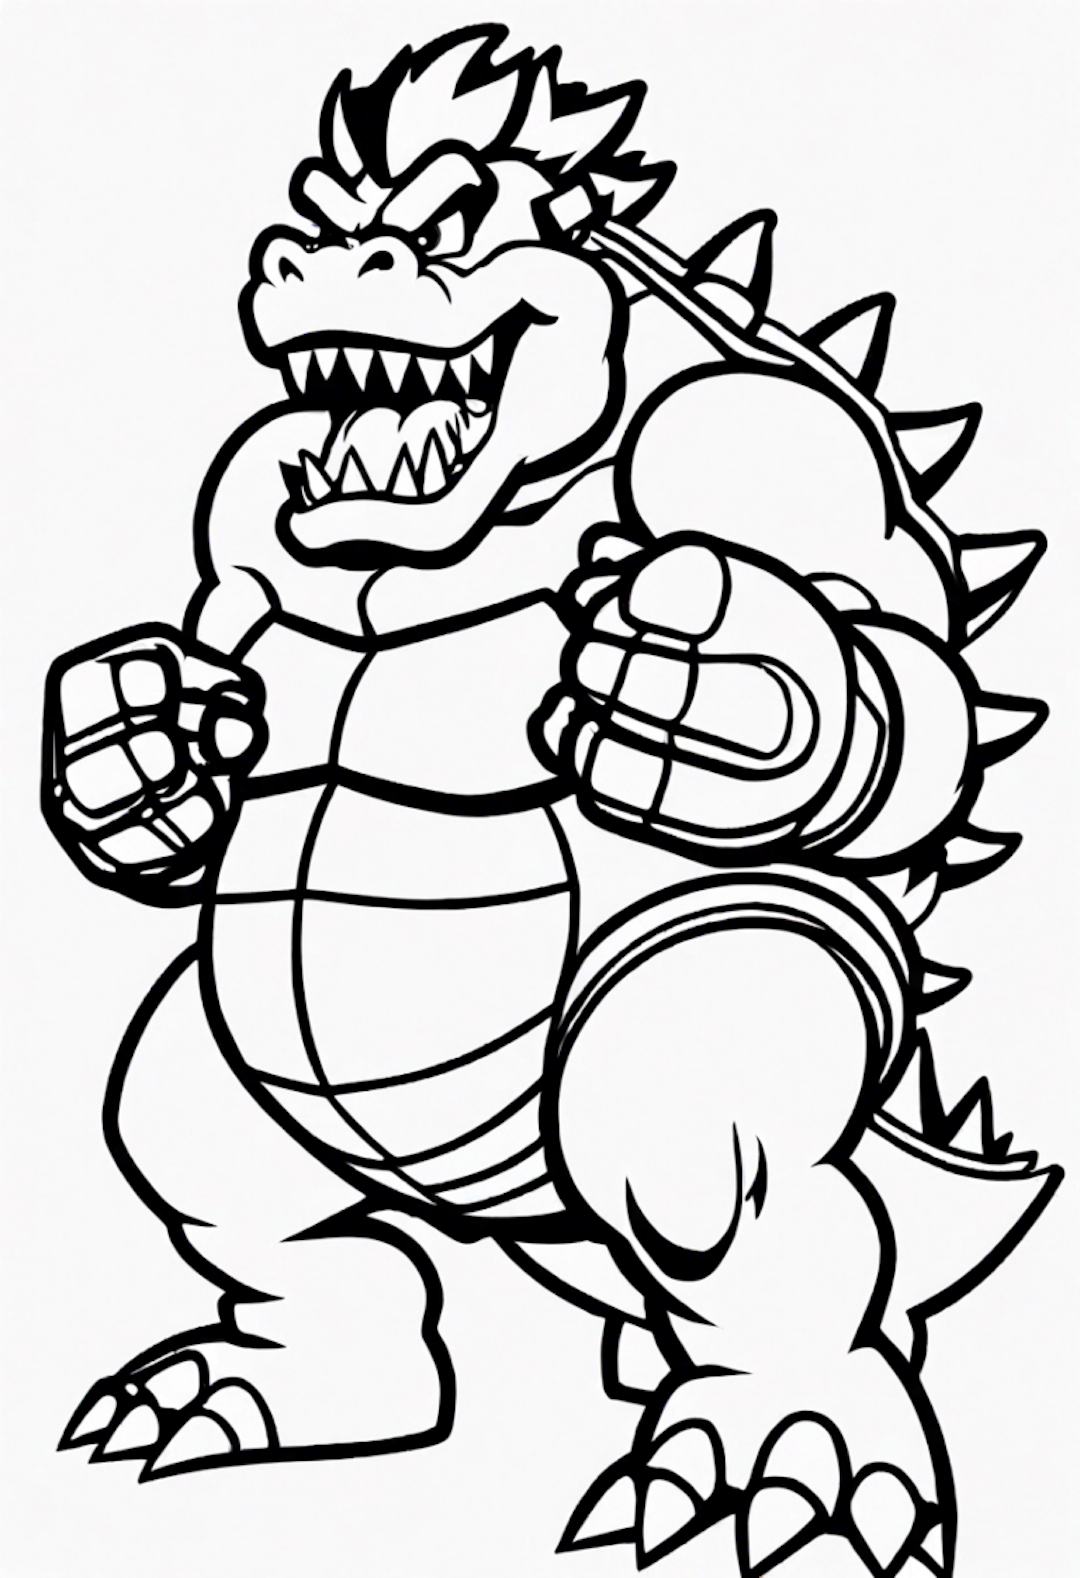 Bowser At The Karaoke Club coloring pages